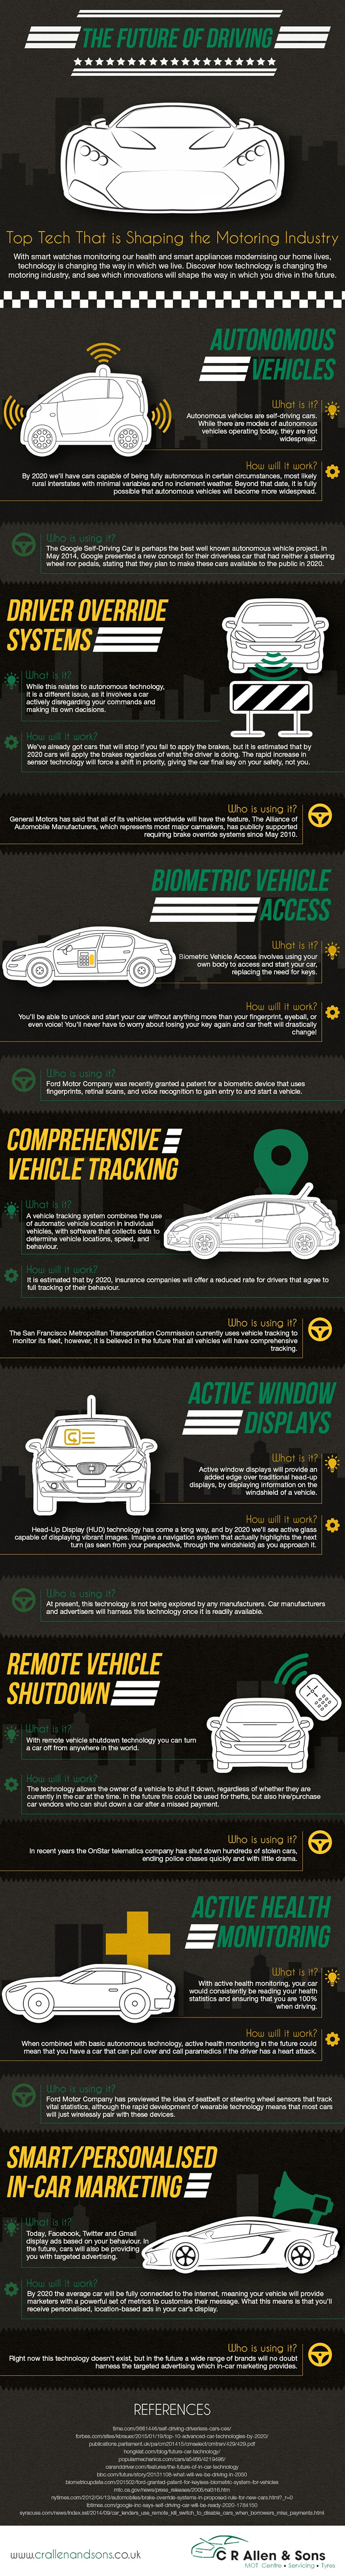 infographic-the-future-of-driving--top-tech-shaping-the-motoring_5616031fdc5ae_w1500